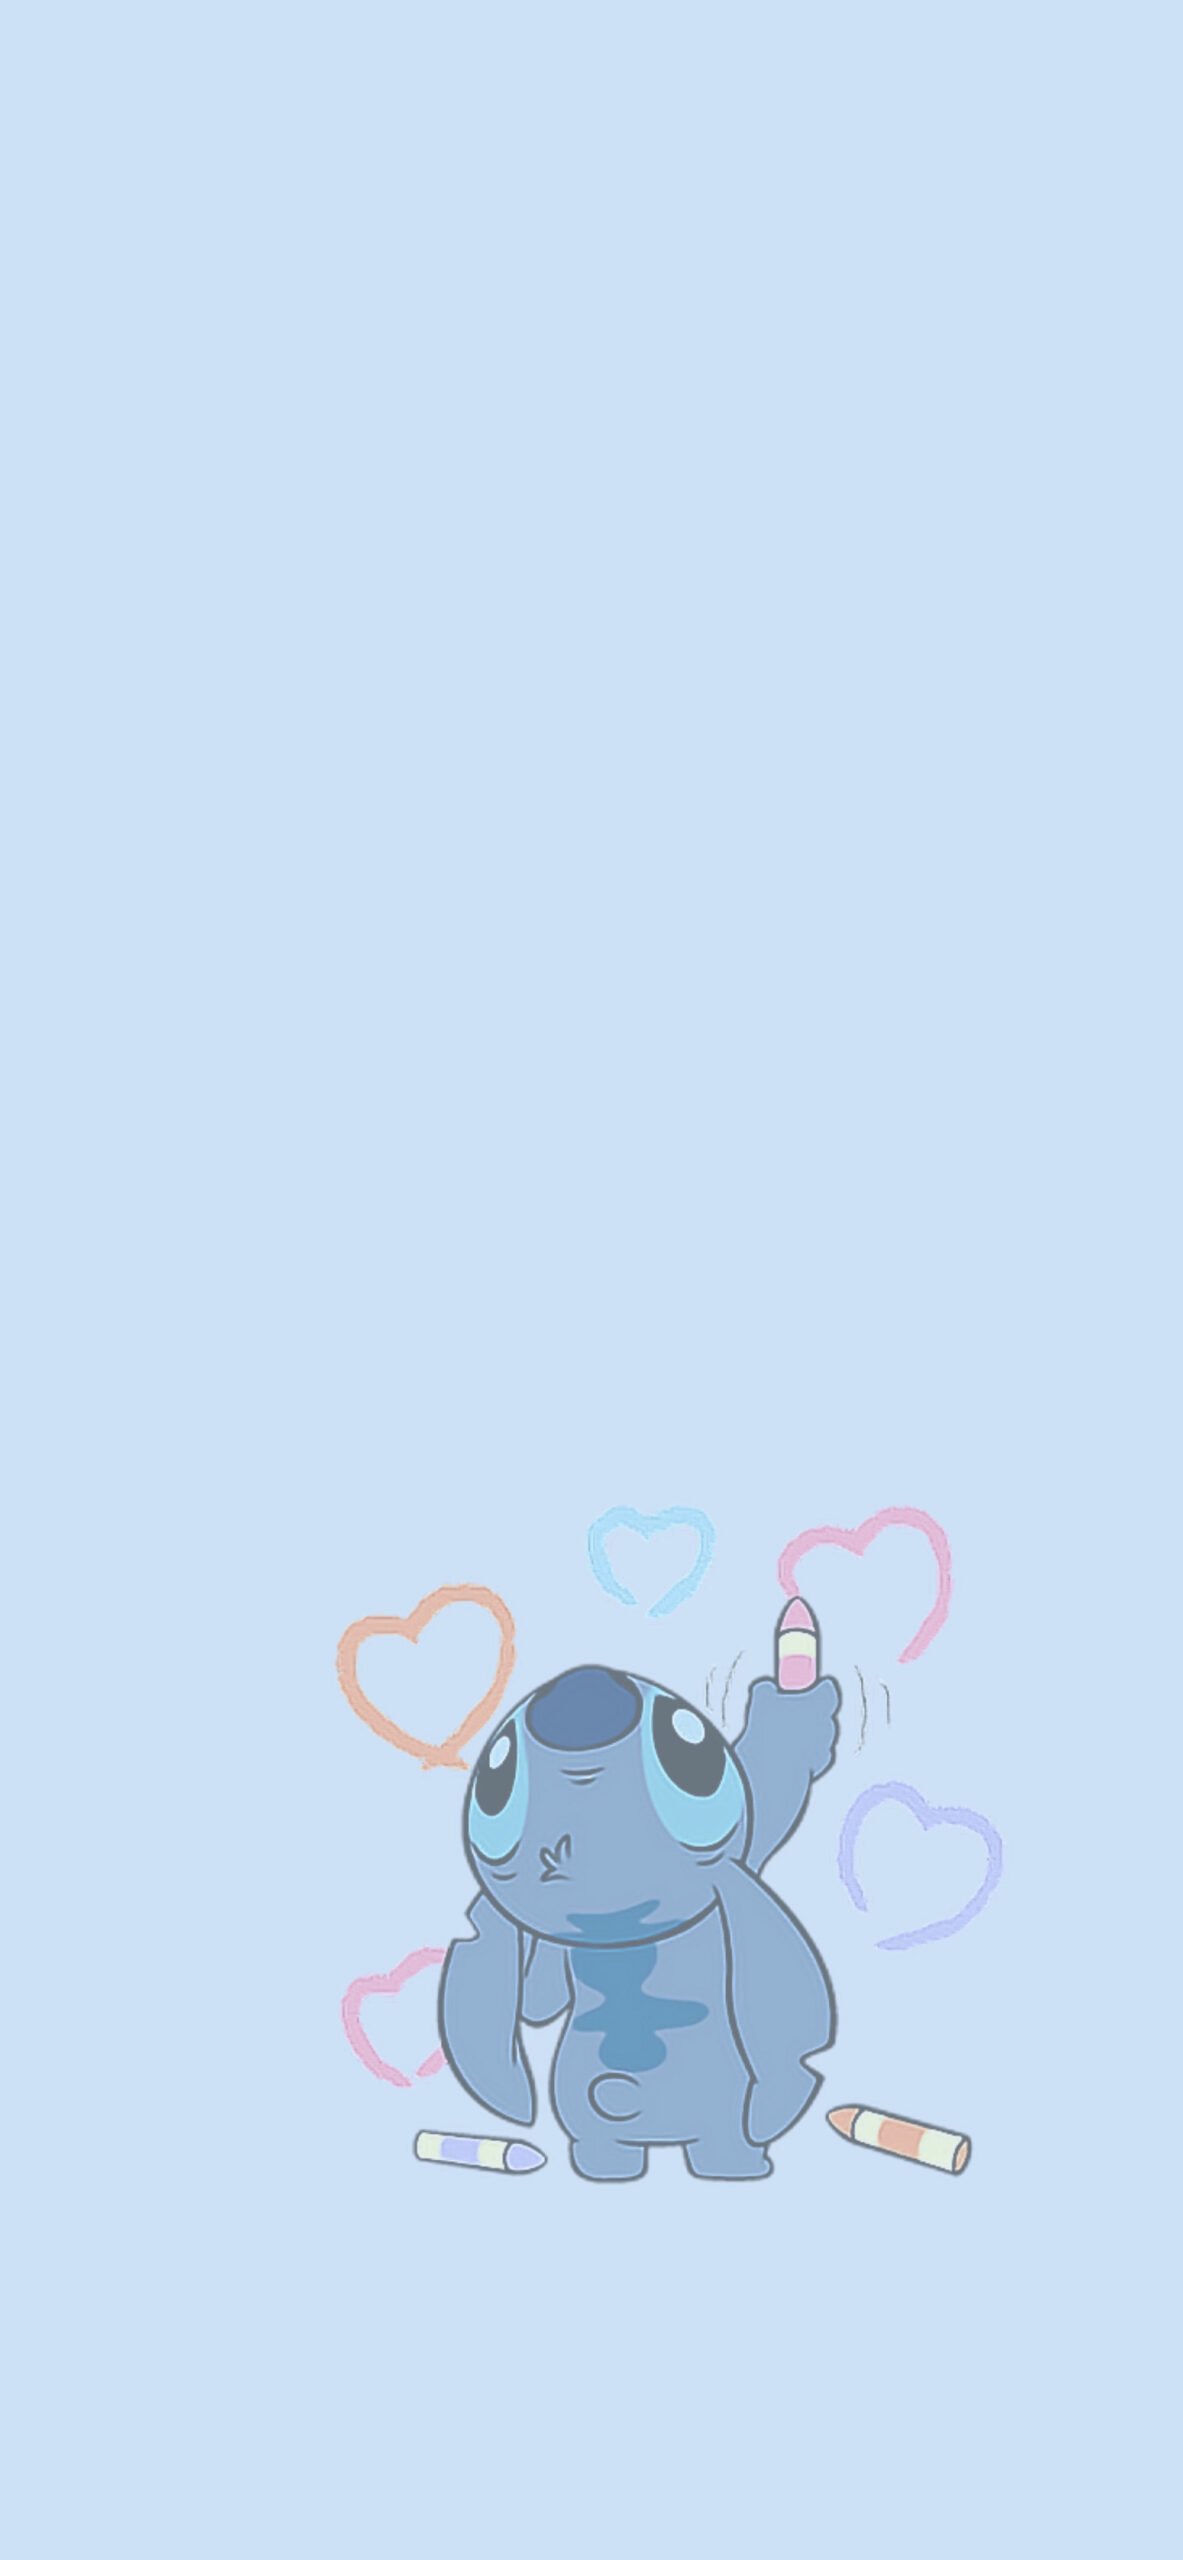 Stitch Drawing Blue Wallpaper Stitch Wallpaper for iPhone